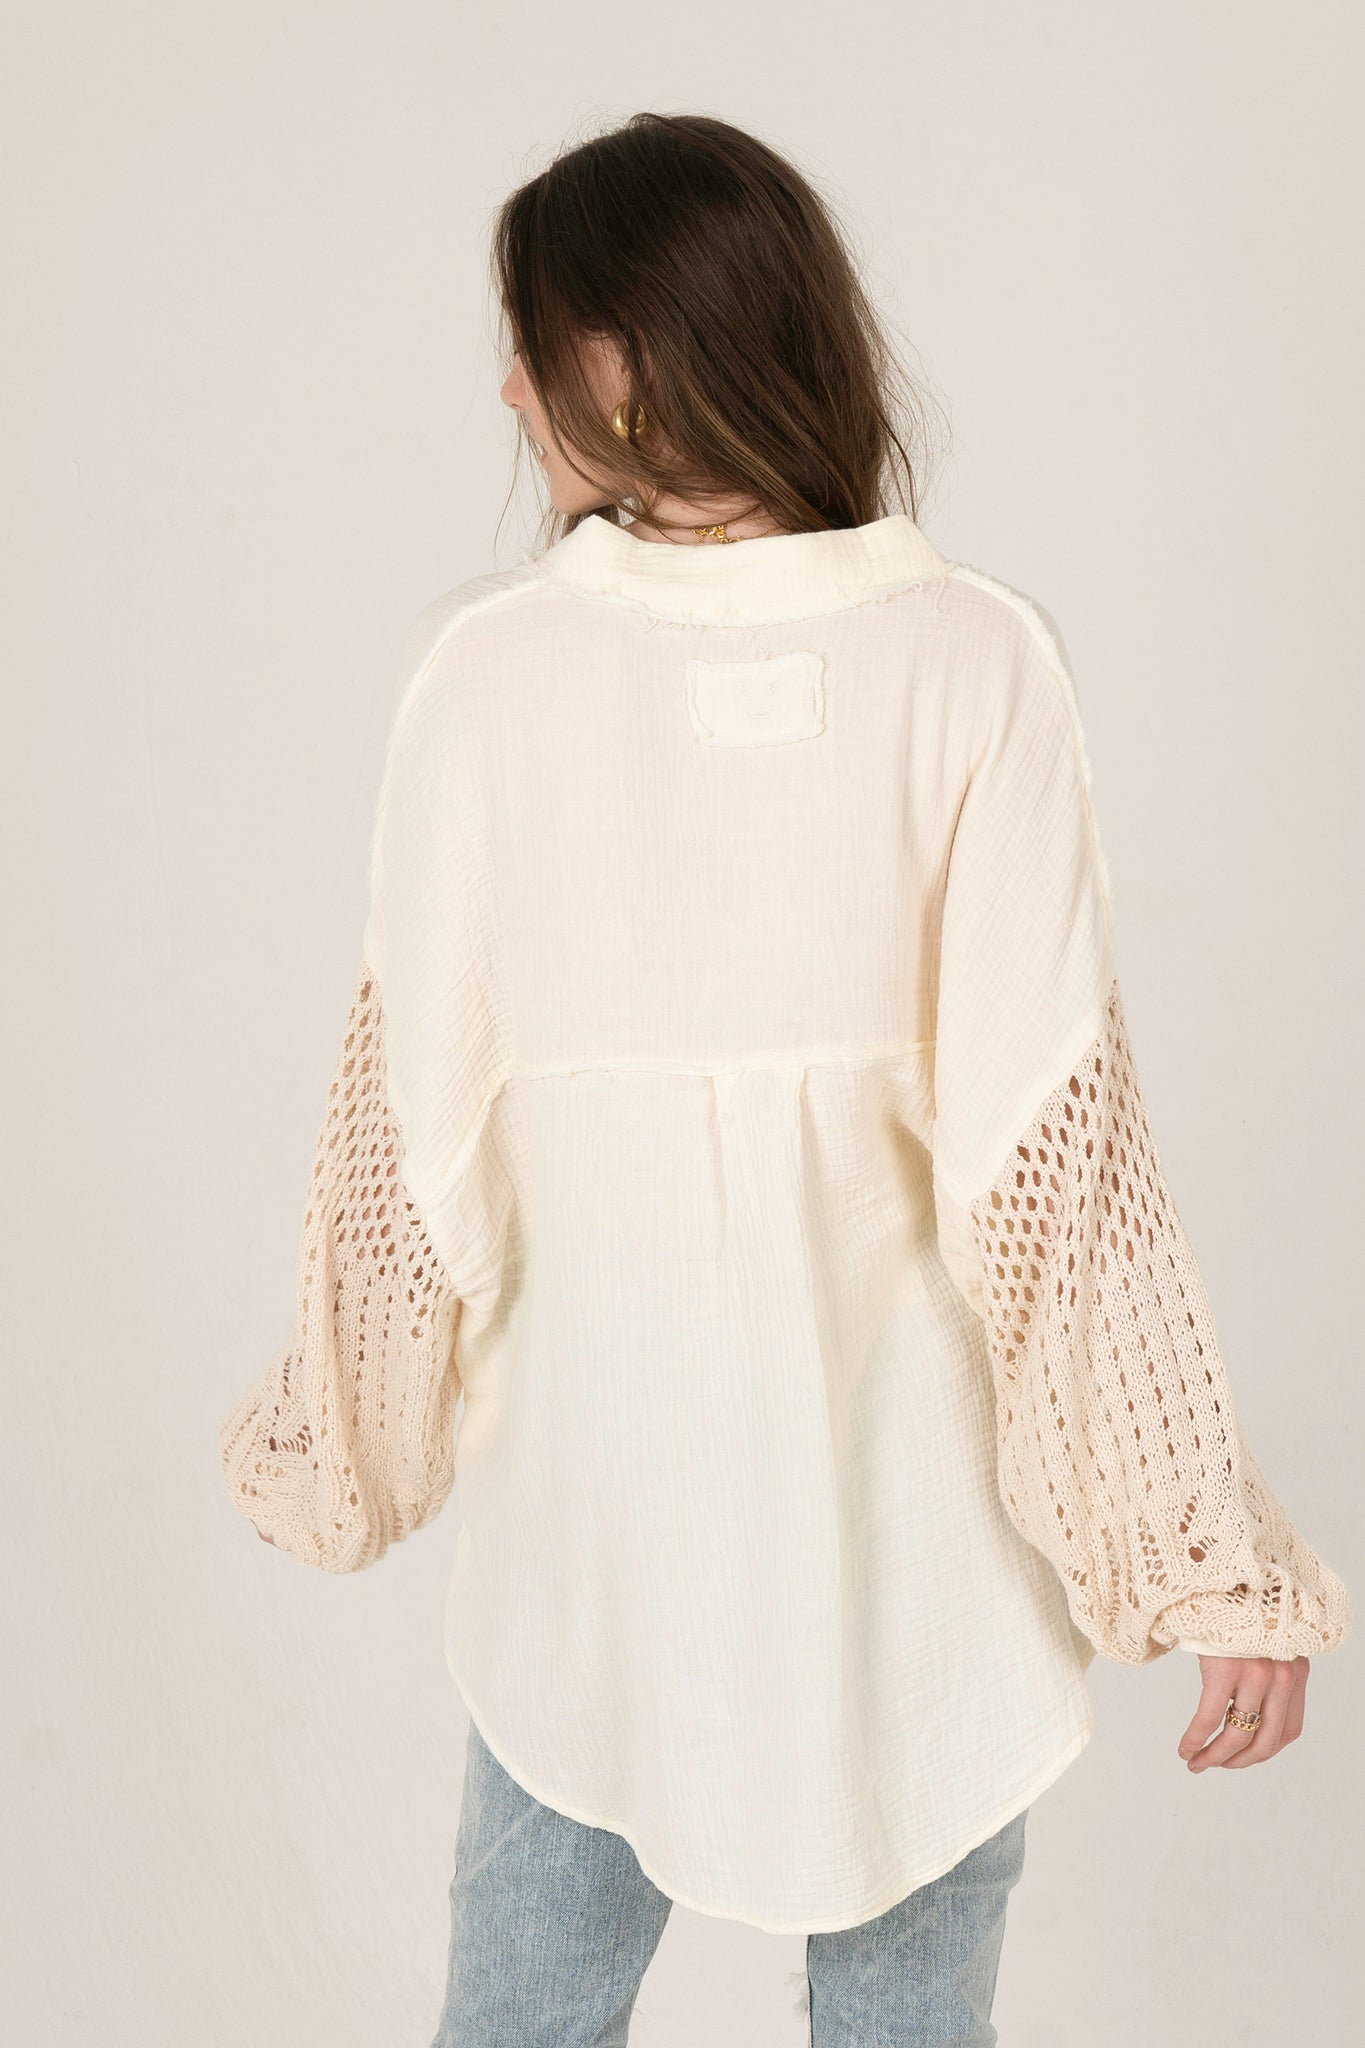 View 3 of Wisteria Cardigan in Cream, a Sweaters from Larrea Cove. Detail: .